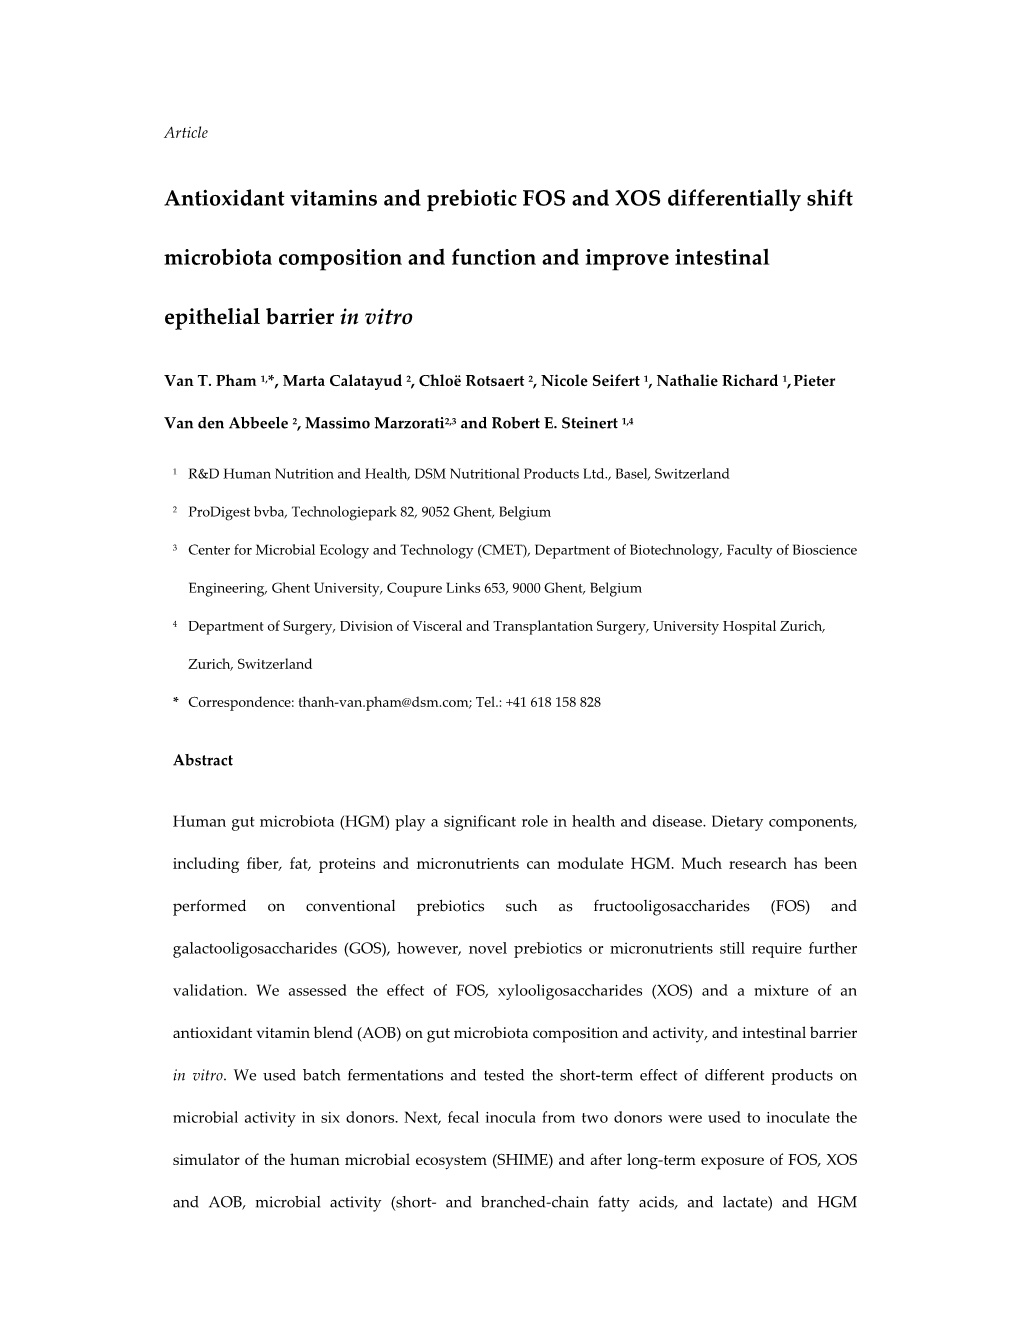 Antioxidant Vitamins and Prebiotic FOS and XOS Differentially Shift Microbiota Composition and Function and Improve Intestinal Epithelial Barrier in Vitro